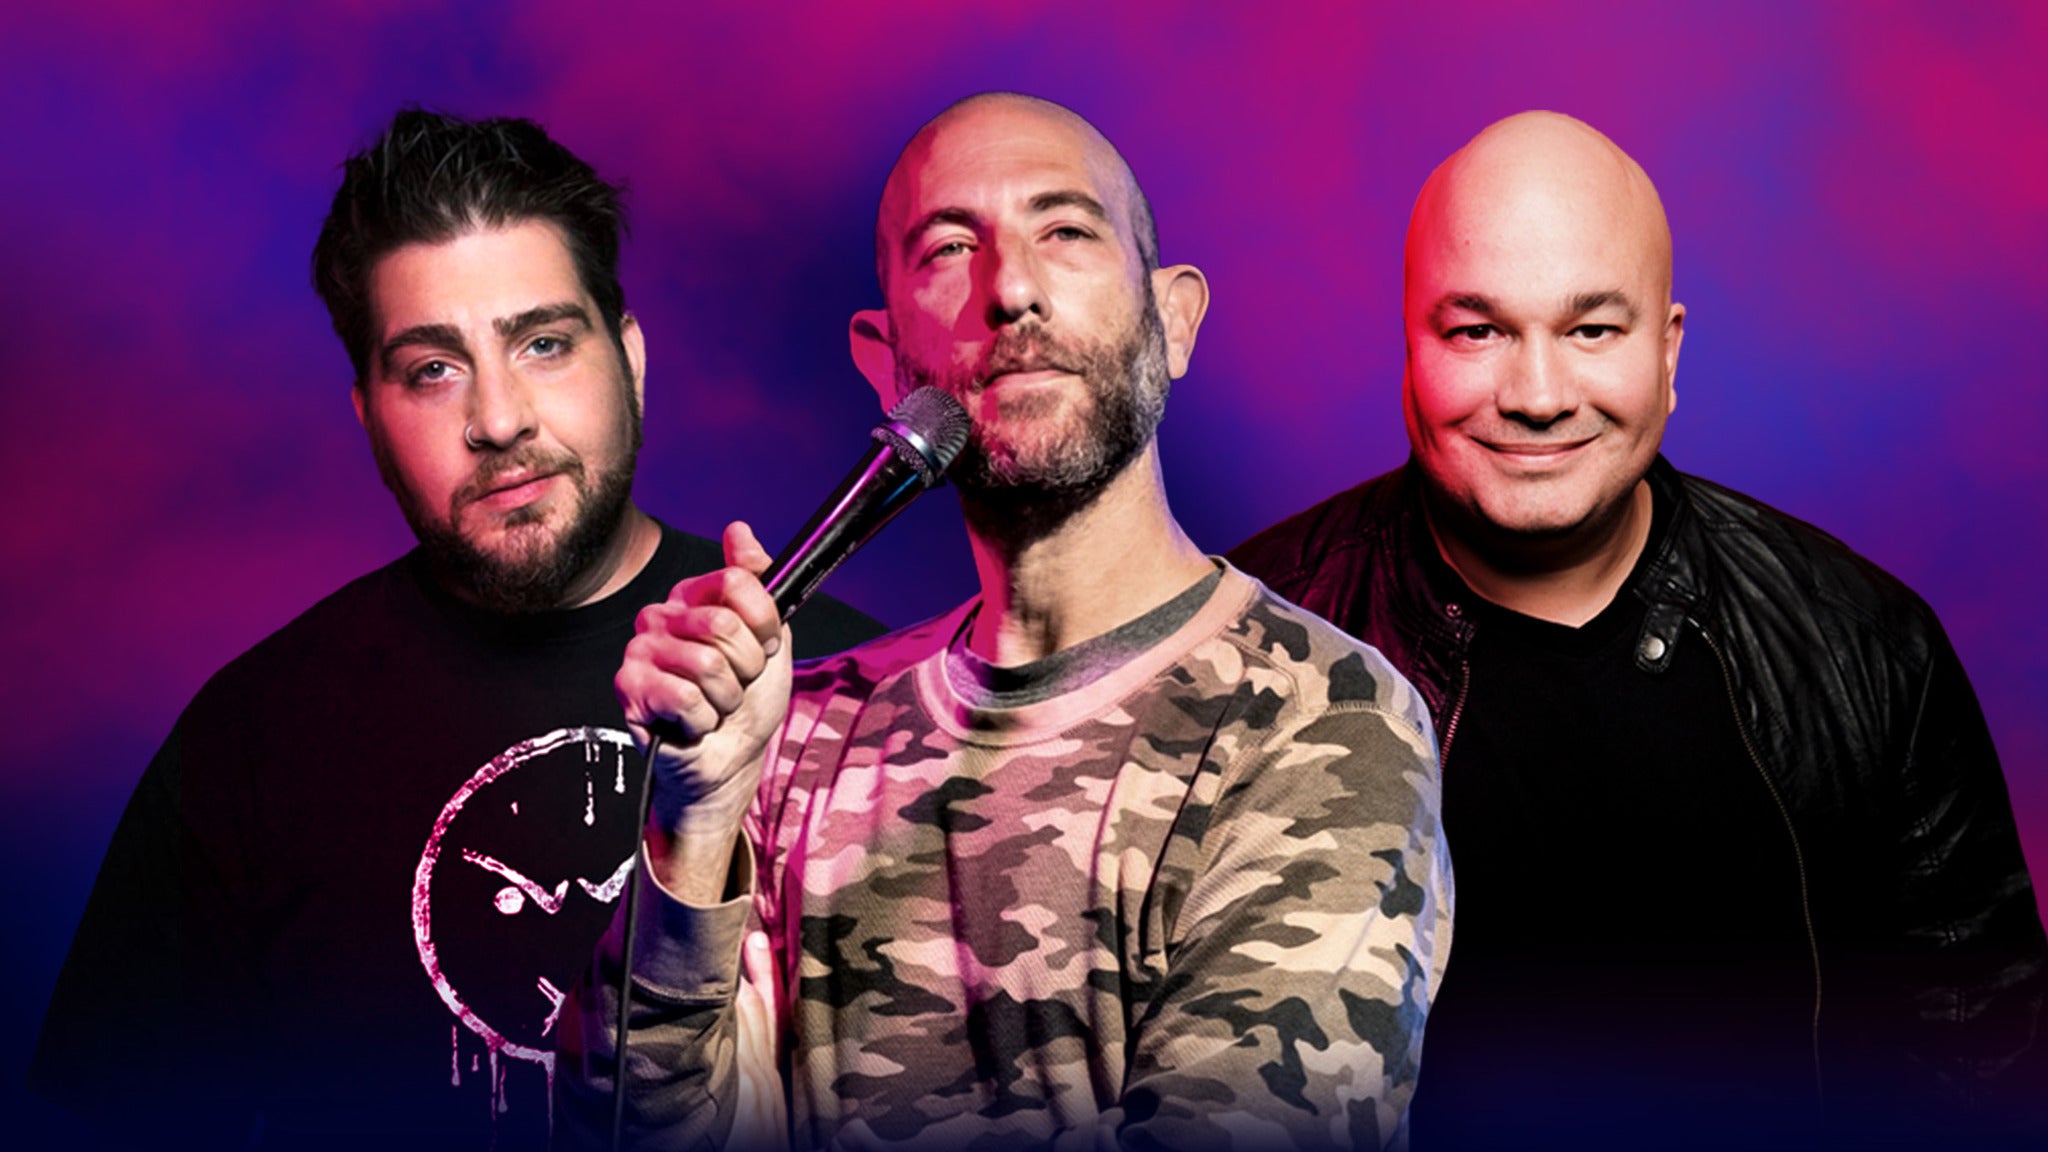 Ari Shaffir, Big Jay Oakerson, and Robert Kelly in Detroit promo photo for Citi® Cardmember Preferred presale offer code